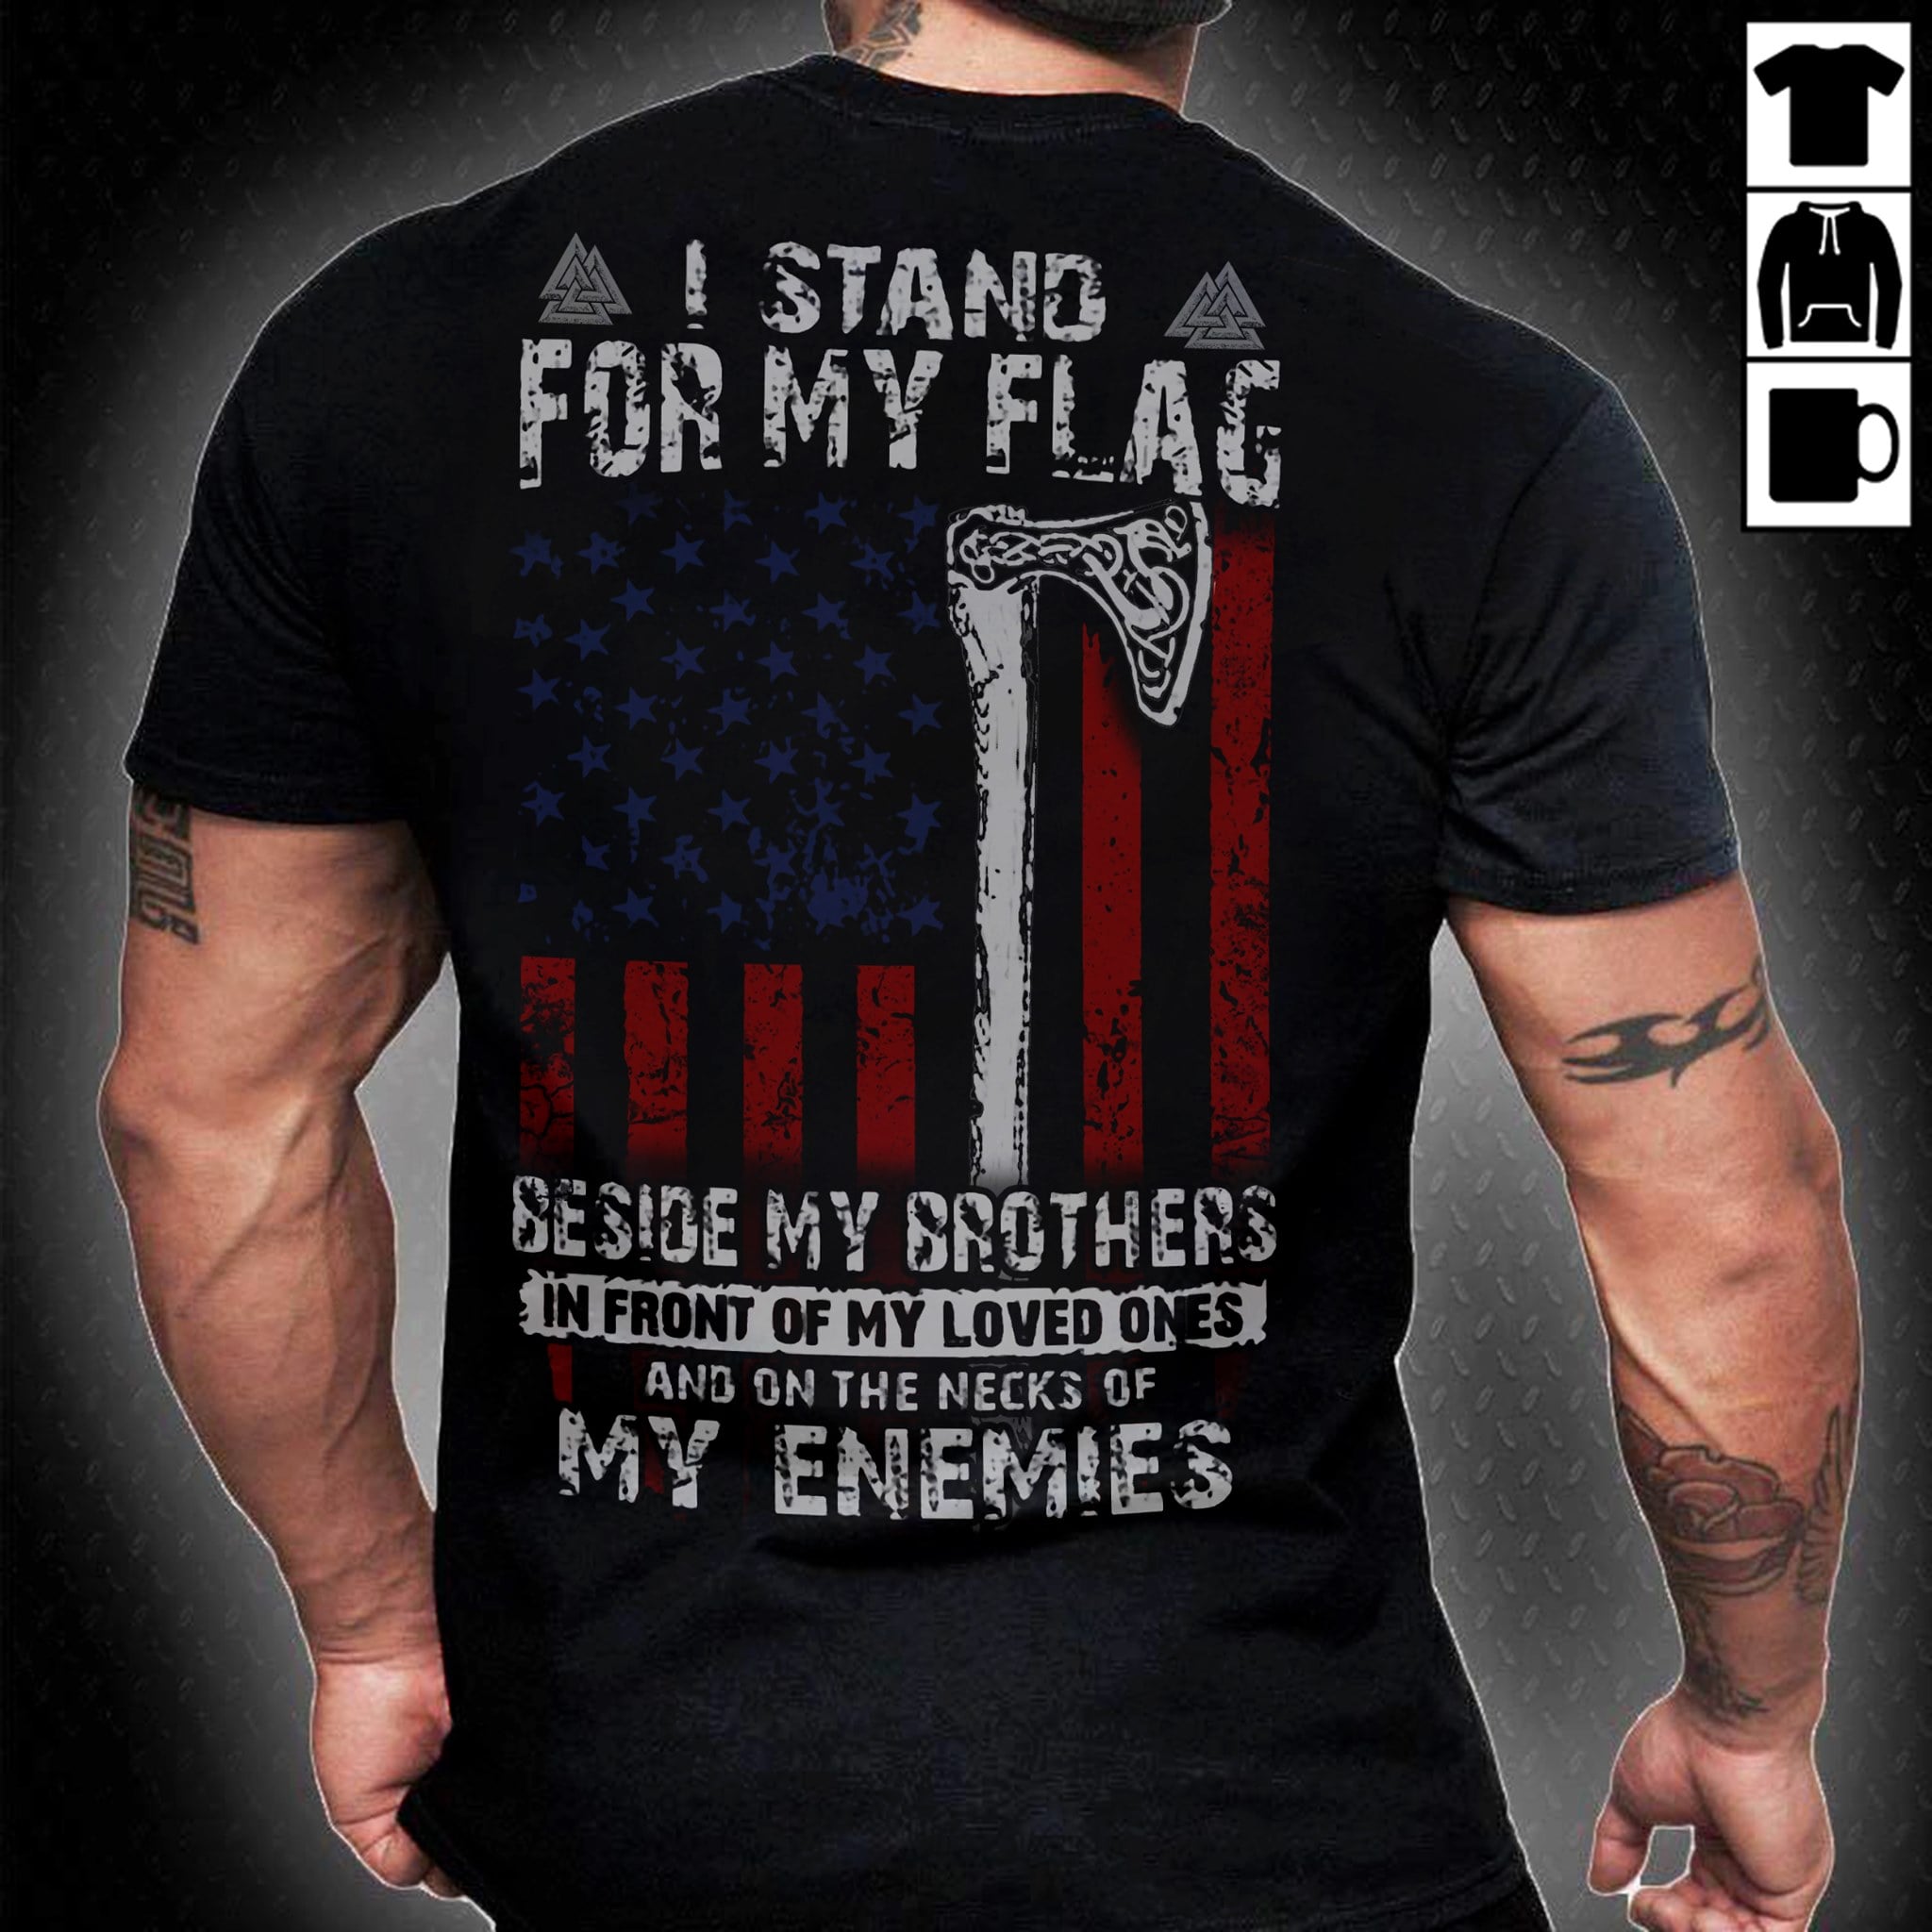 I stand for my flag beside my brothers in front of my loved ones and on the necks of my enemies